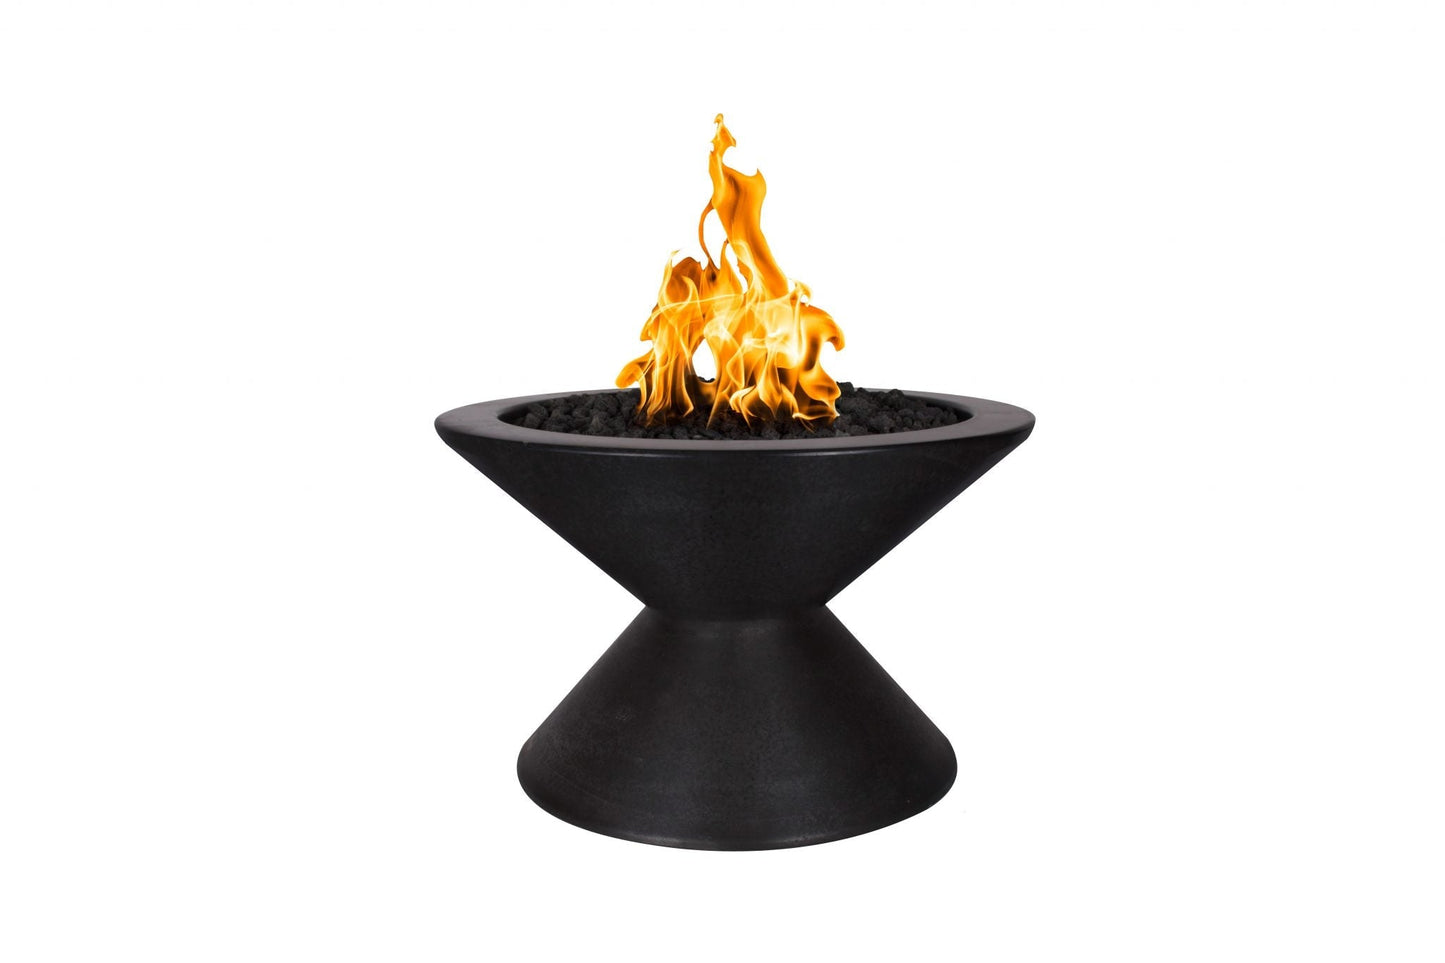 The Outdoor Plus Round Lucia 31" Metallic Pearl GFRC Concrete Natural Gas Fire Pit with 110V Electronic Ignition